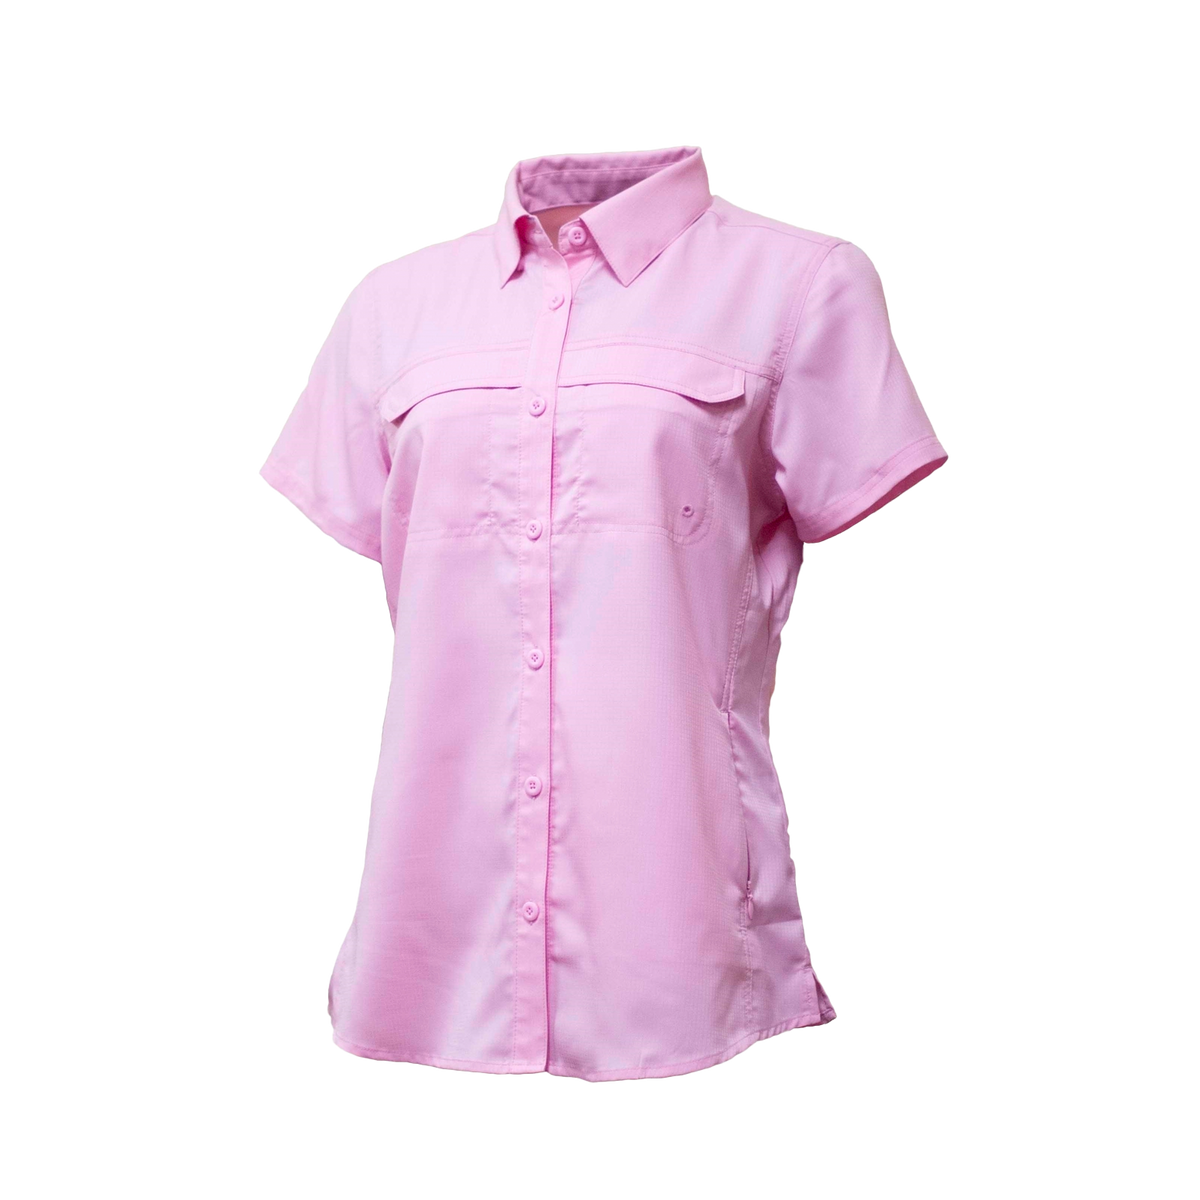 Bass Pro Shops Kid Casters Fishing Short-Sleeve Shirt for Girls - Pink - L